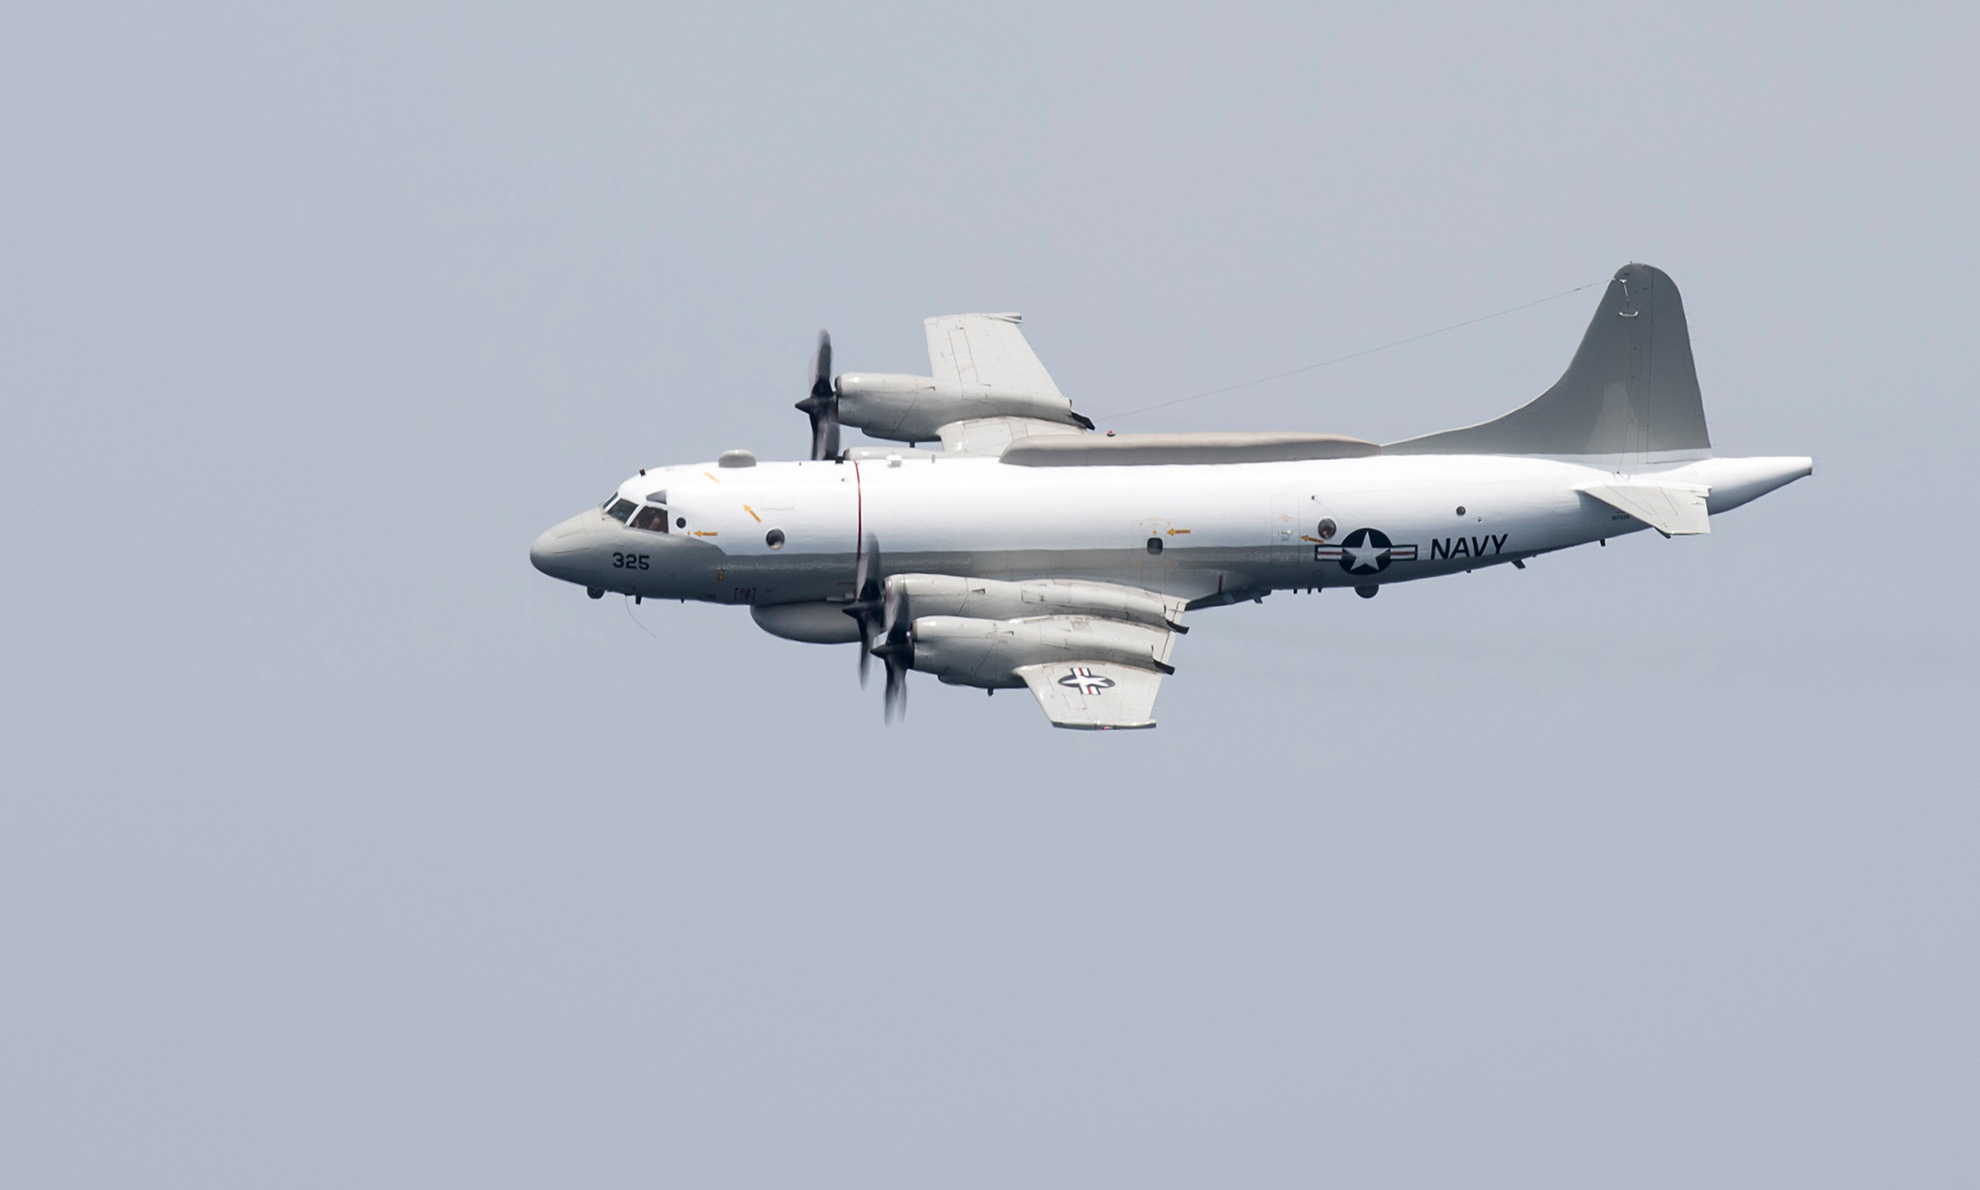 Official U.S. Navy file photo of an EP-3E Aries aircraft in flight. -